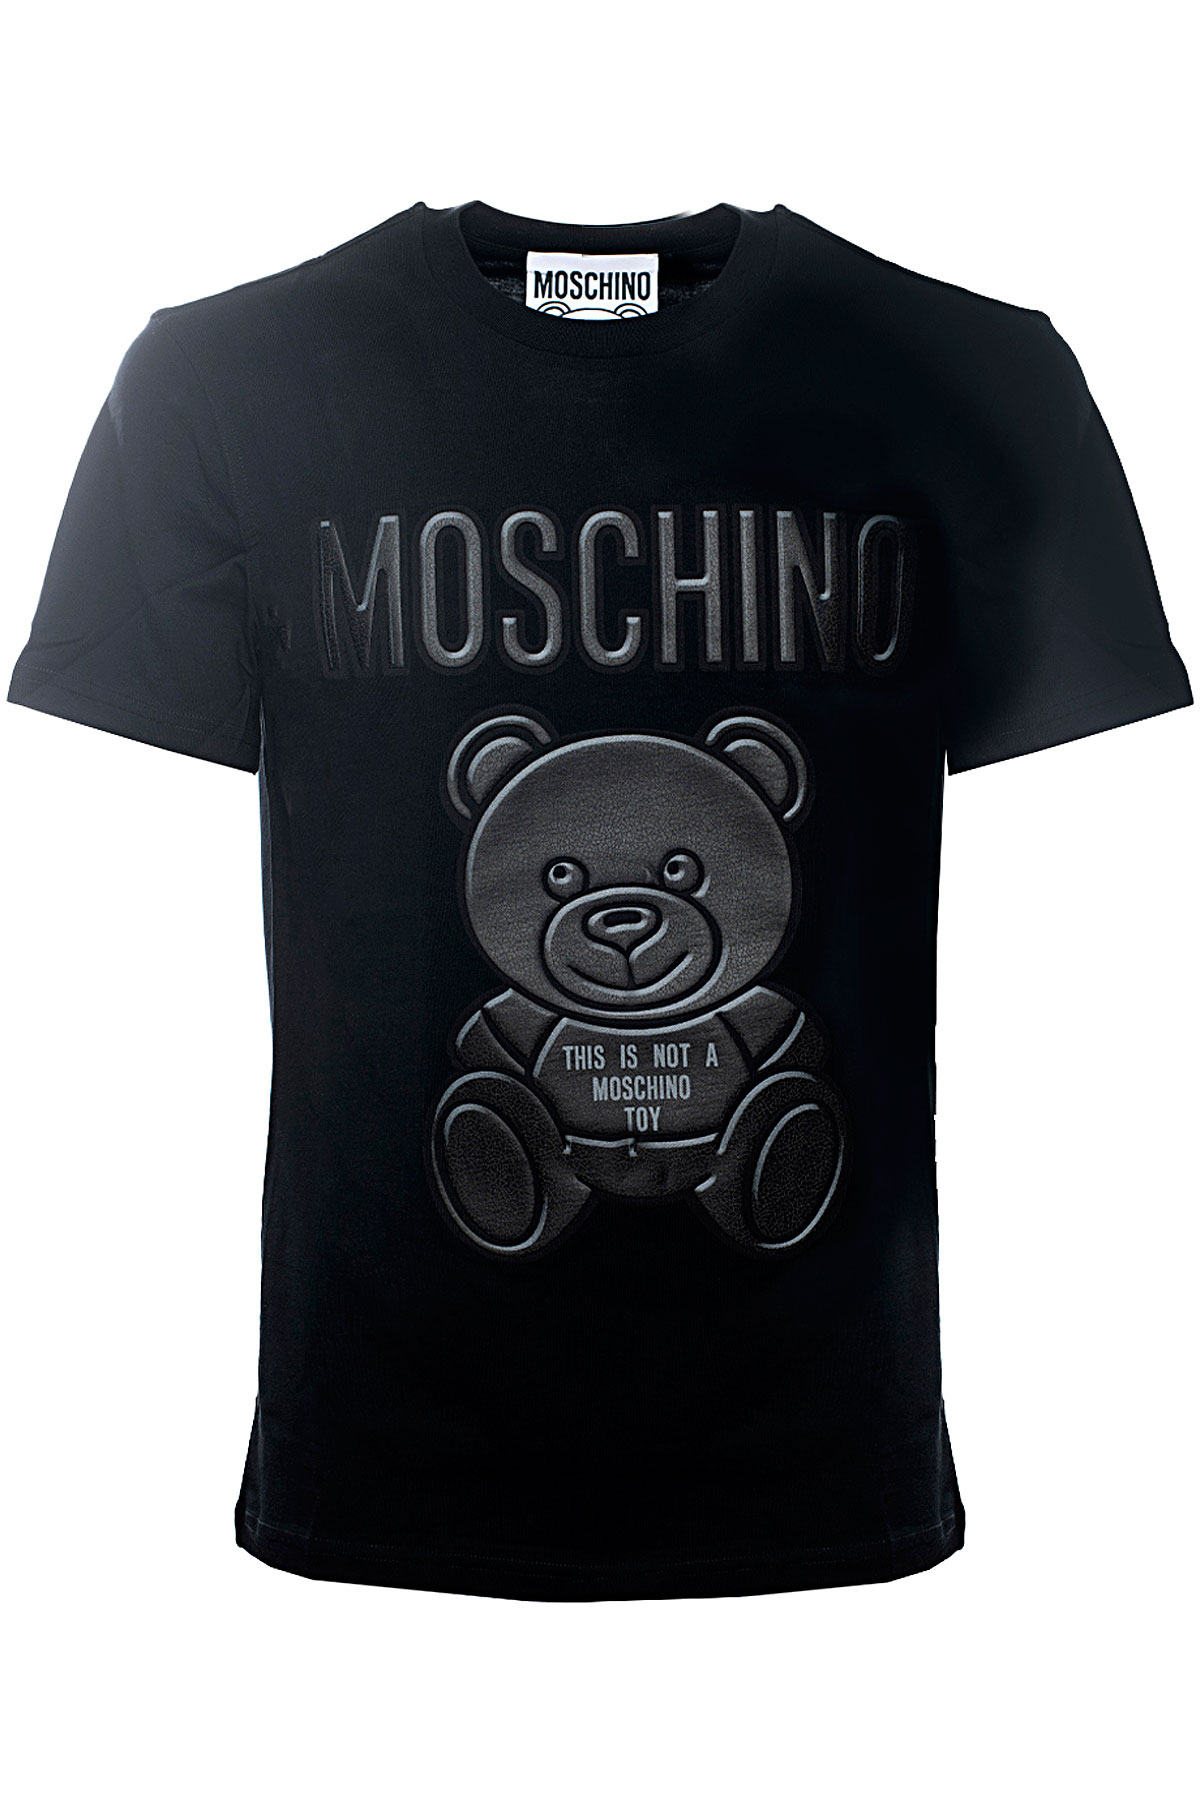 Mens Clothing Moschino, Style code: 0730-7041-1555